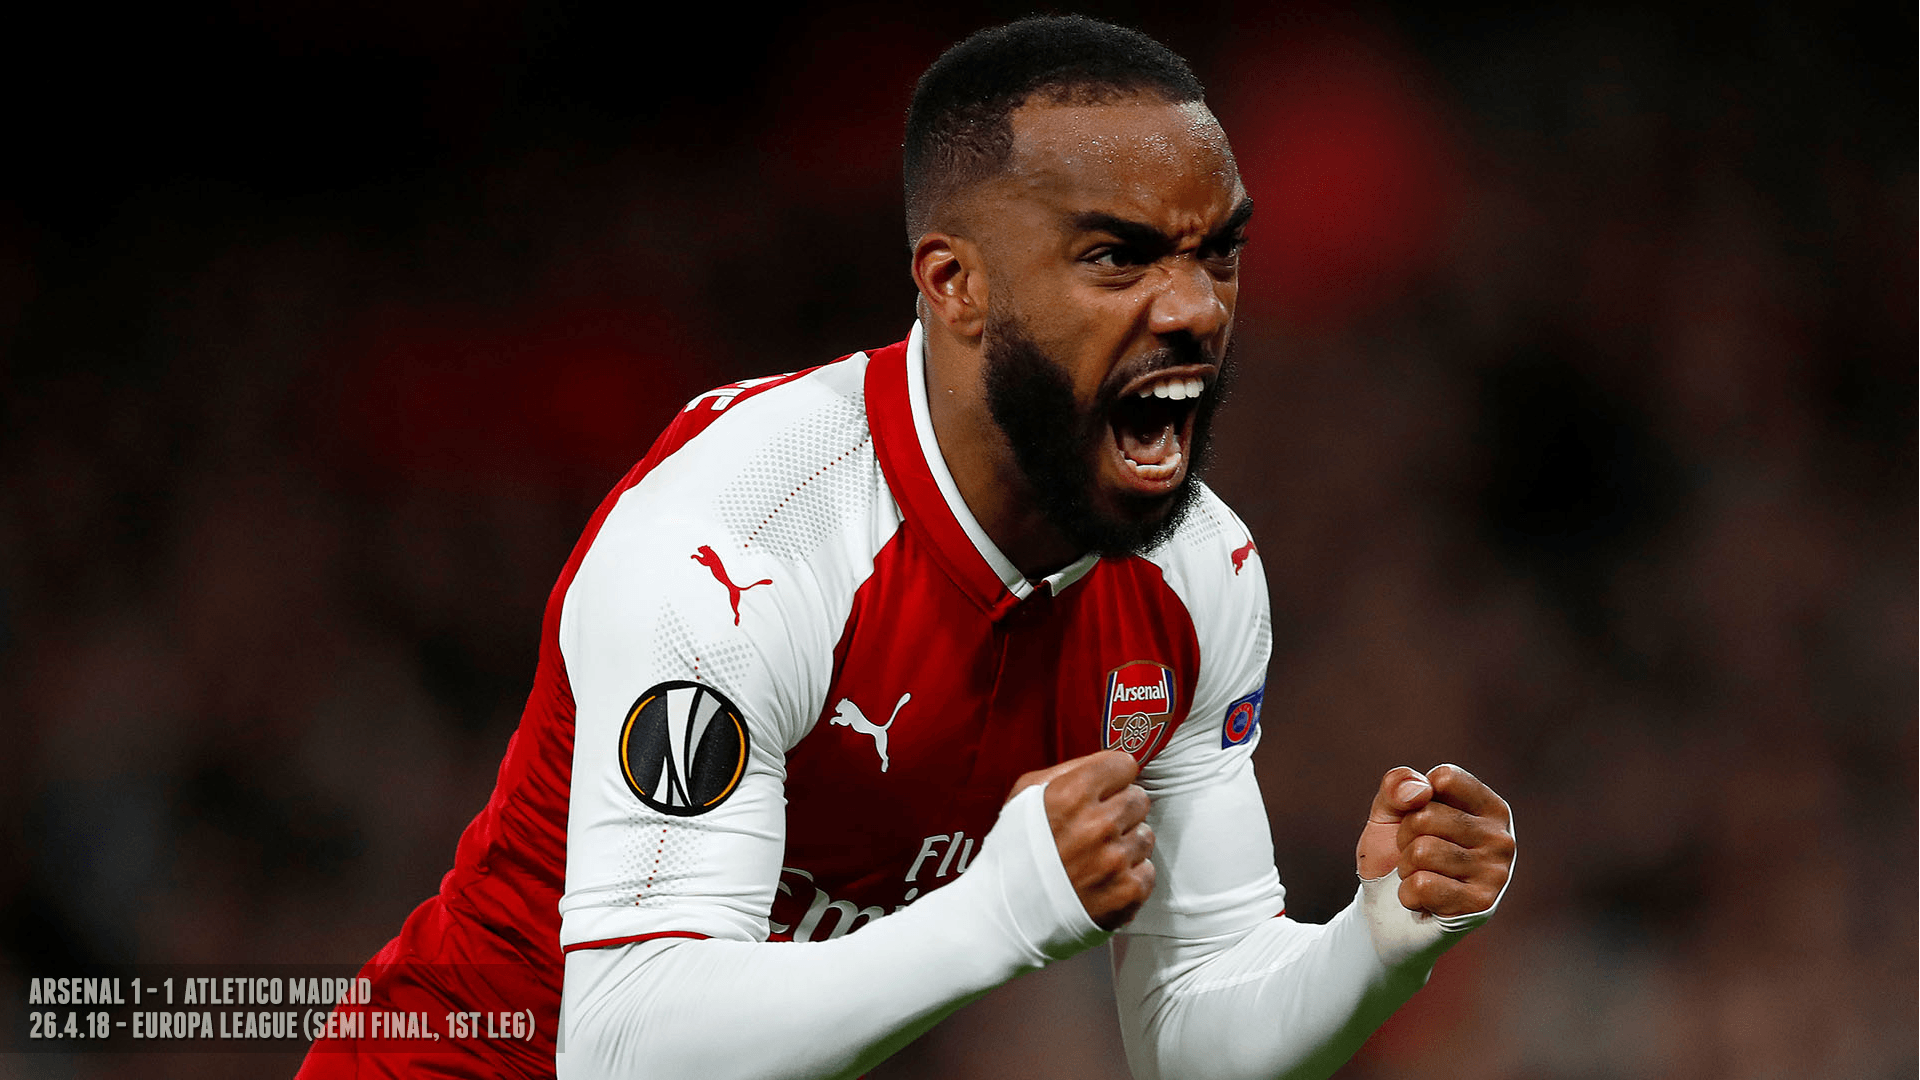 Wallpaper every game. Lacazette against Atletico